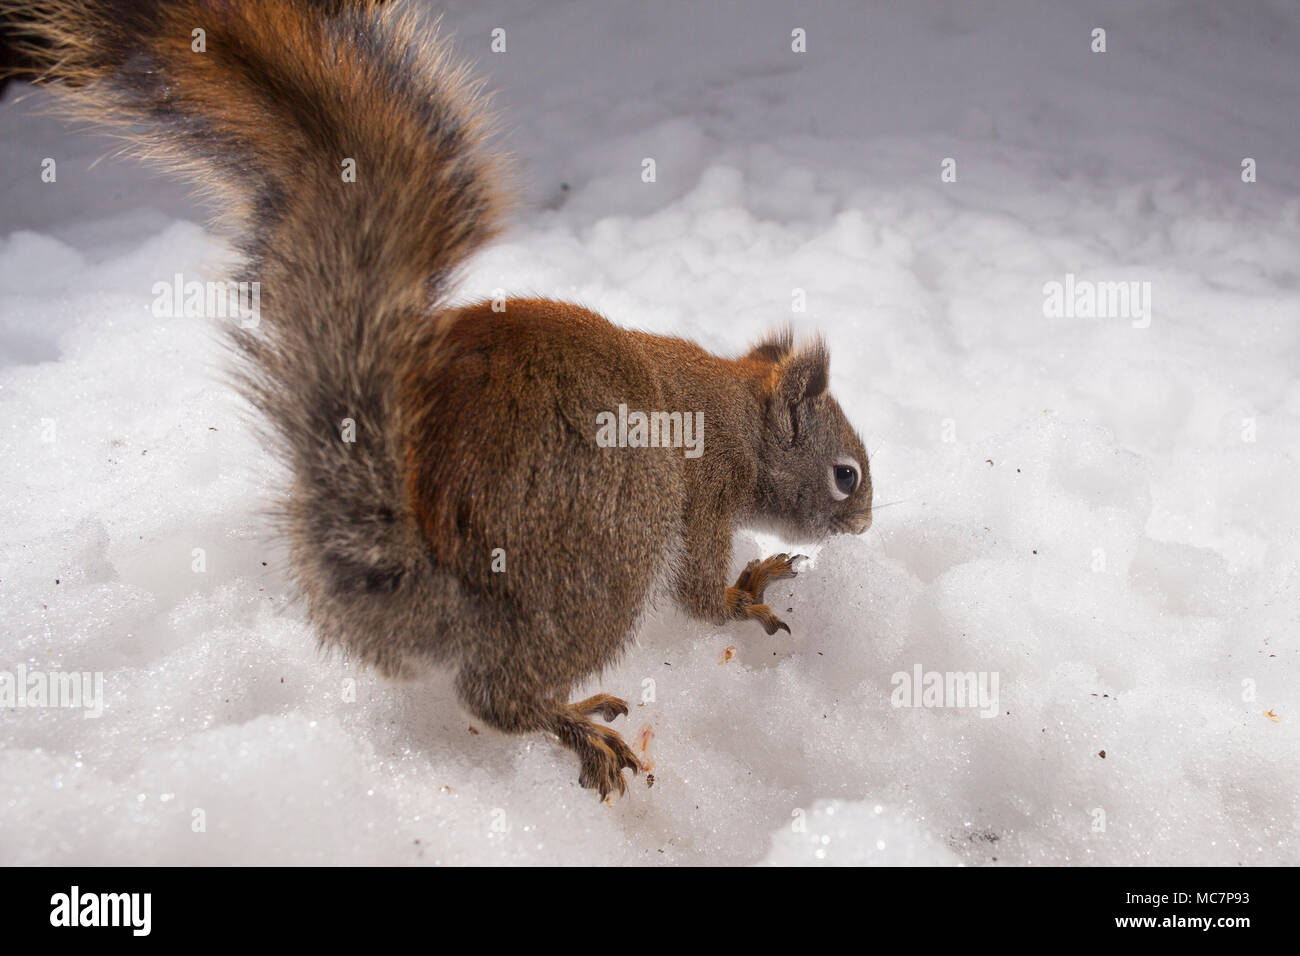 MAYNOOTH, ONTARIO, CANADA - April 13, 2018: A red squirrel (Tamiasciurus hudsonicus), part of the Sciuridae family forages for food.  ( Ryan Carter ) Stock Photo